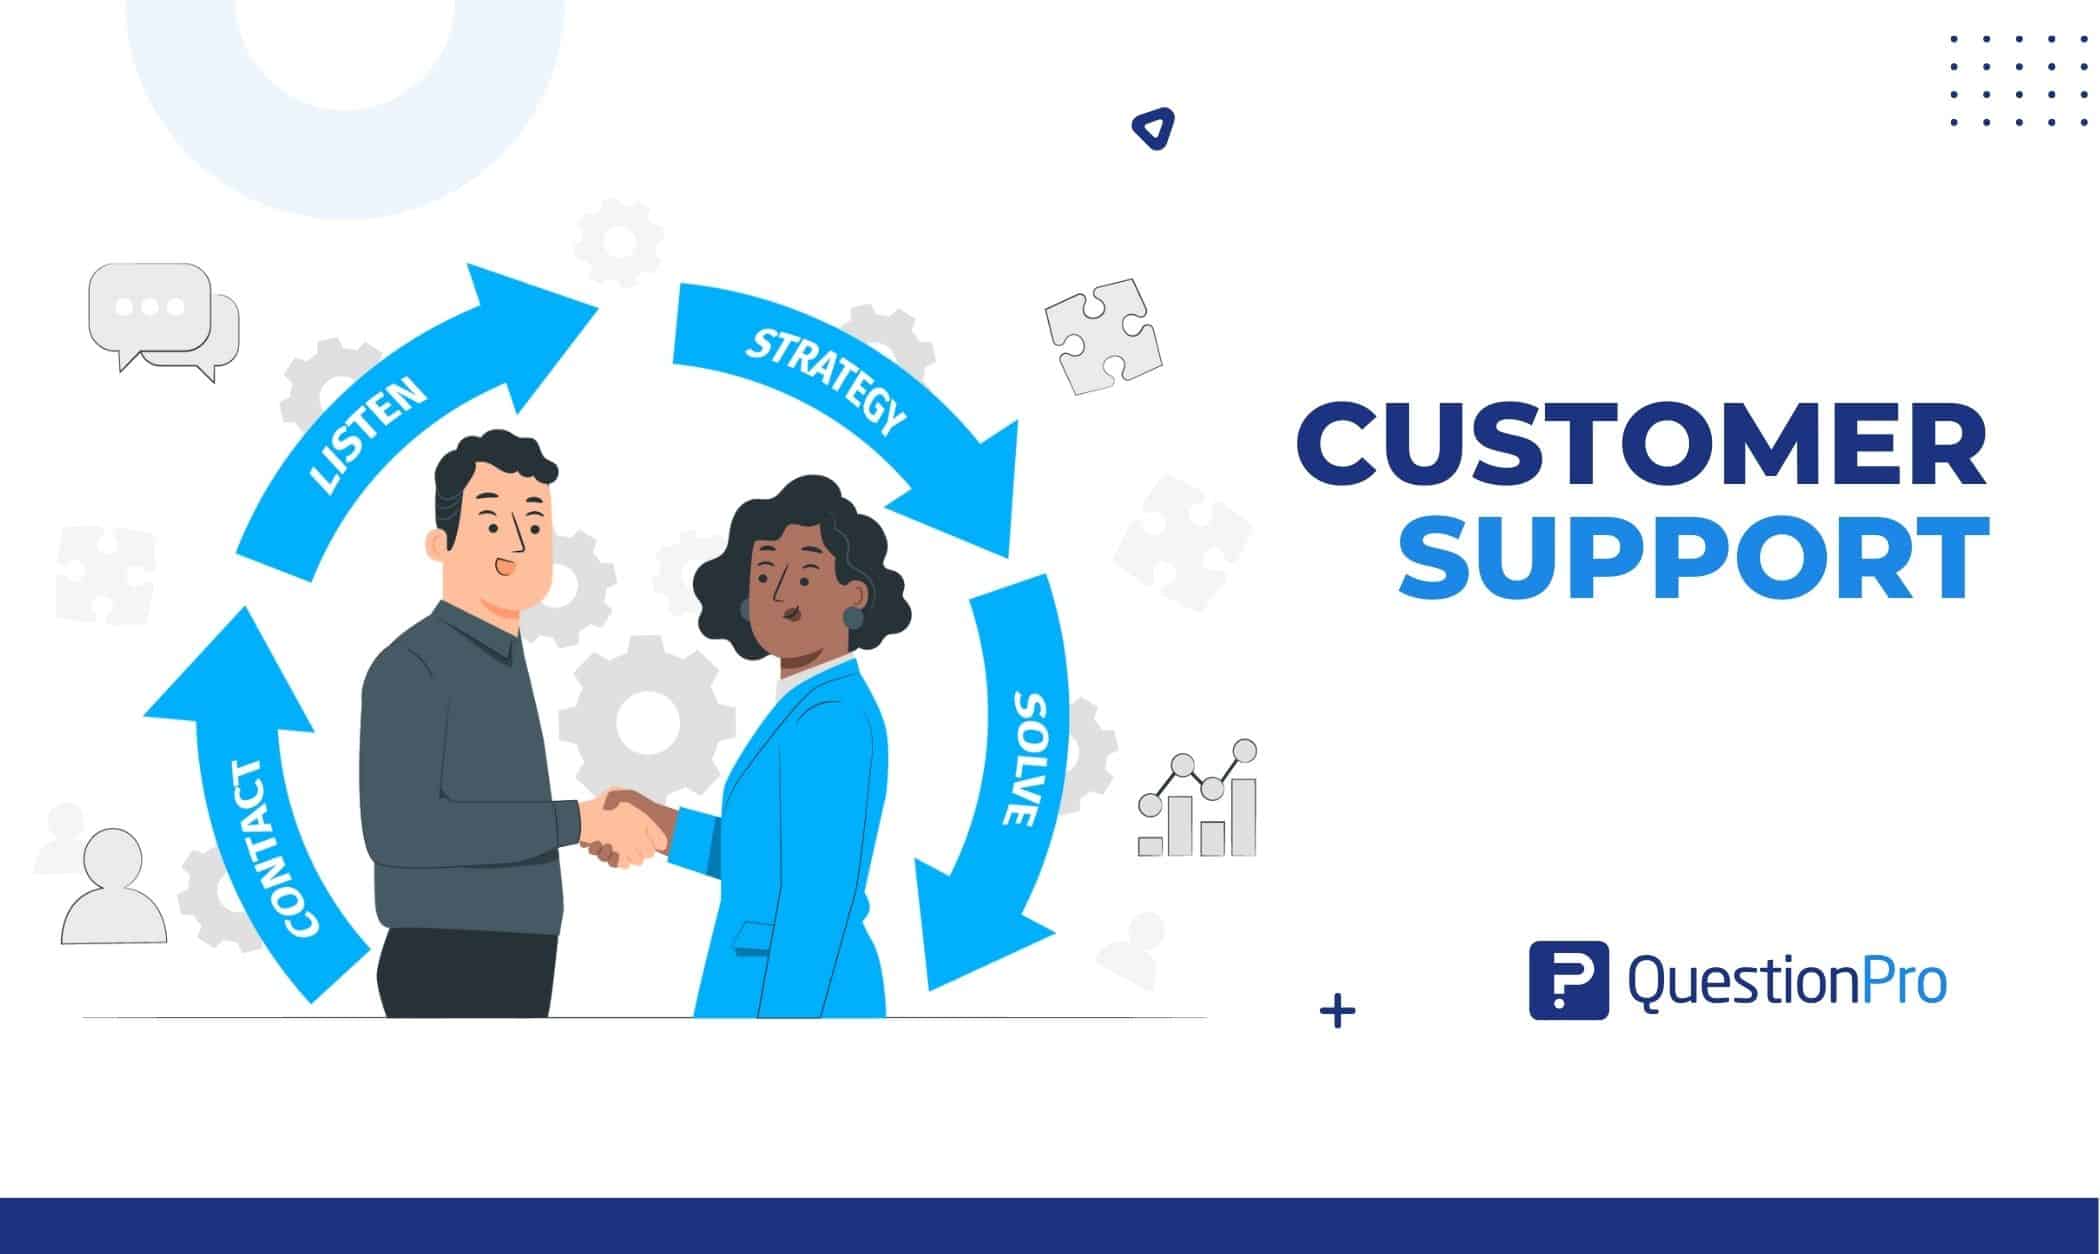 Customer support assists customers with technical issues when utilizing the company's products or services. Learn about value & process.